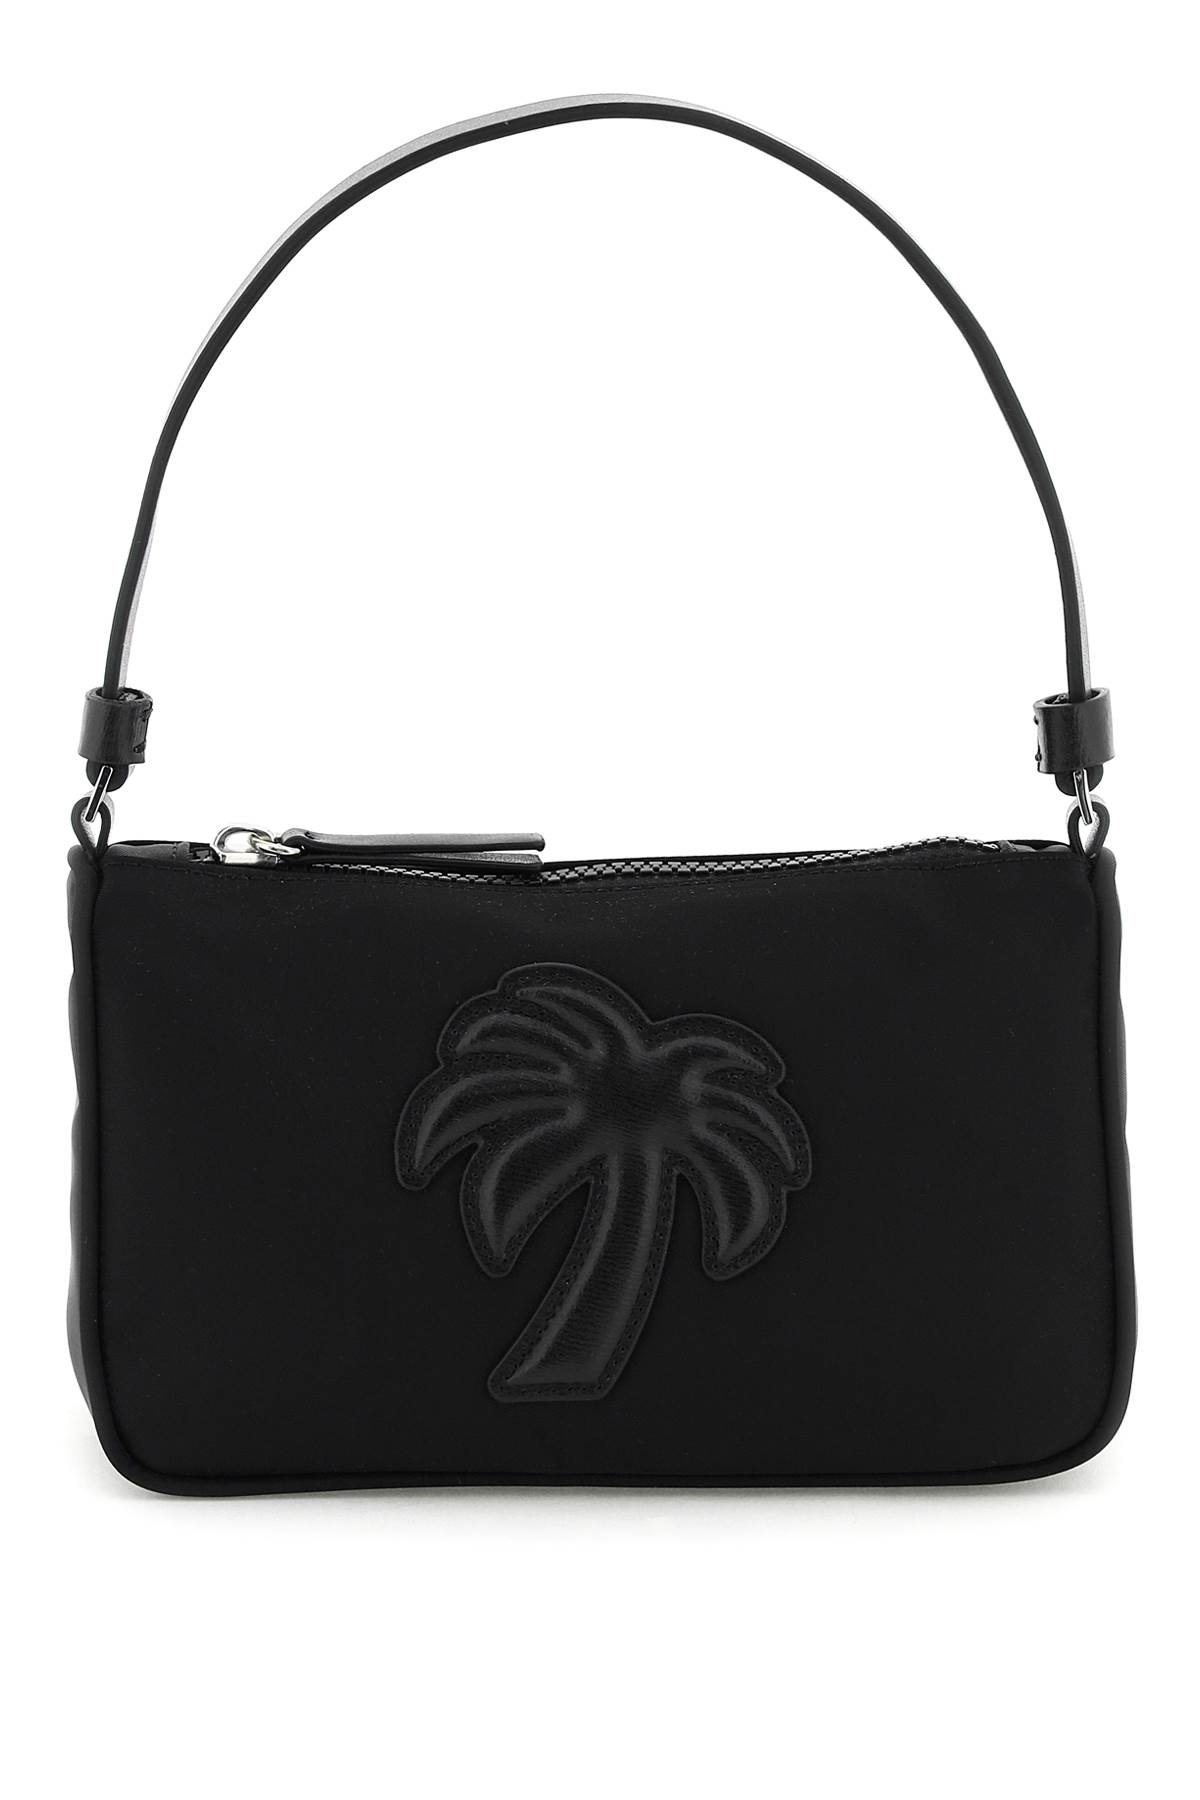 Palm Angels Black Pouch With Palm Tree Logo